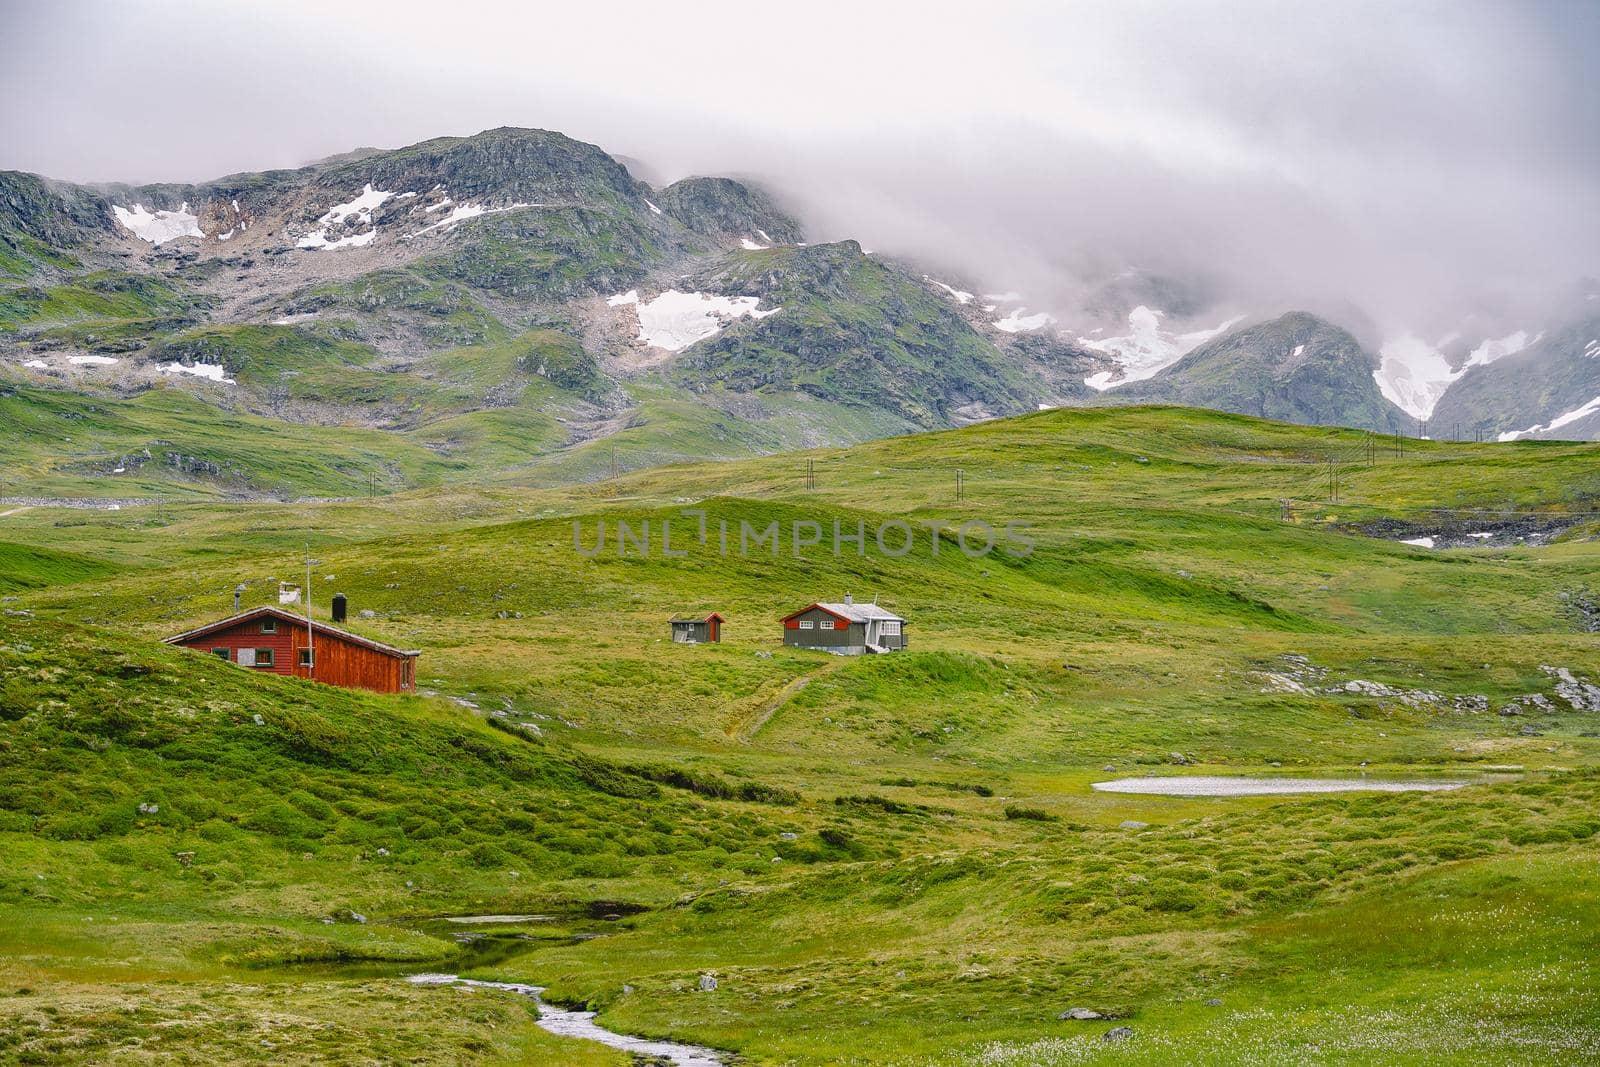 hut wooden mountain huts in mountain pass Norway. Norwegian landscape with typical scandinavian grass roof houses. Mountain village with small houses and wooden cabins with grass on roof in valley.